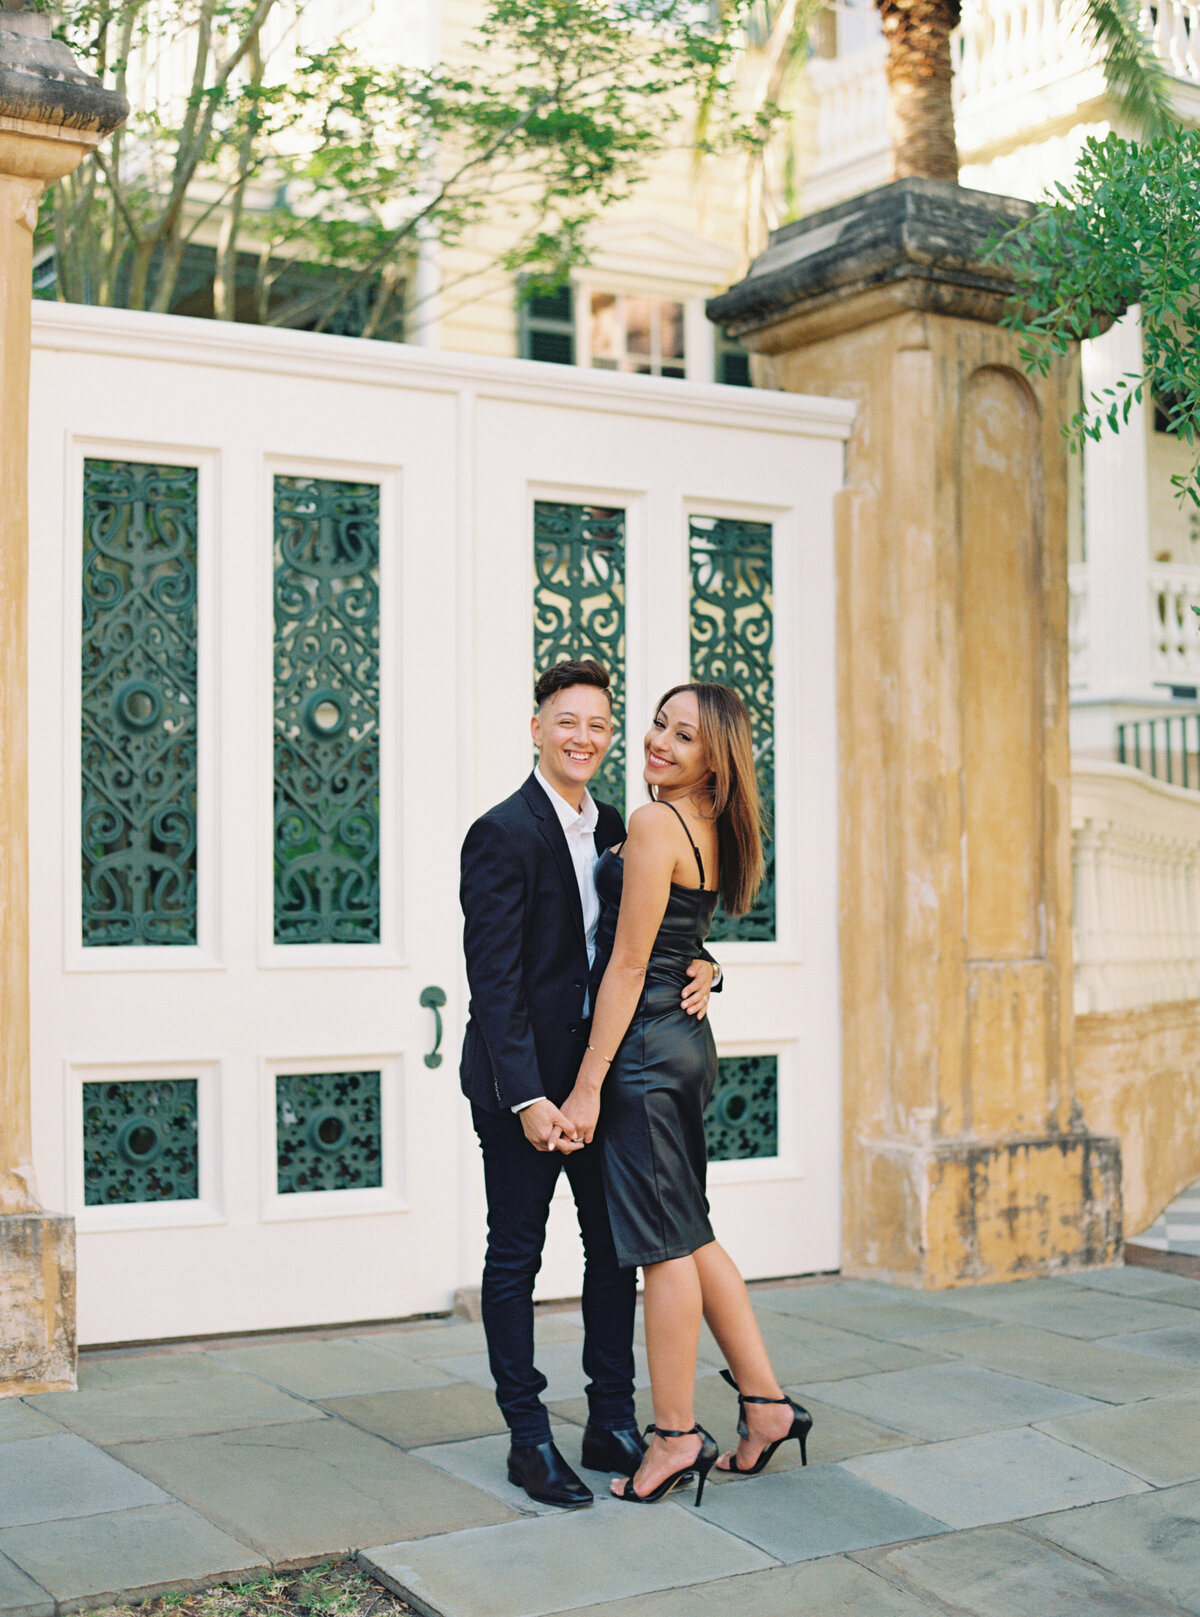 FILM_engagement_what_to_wear_to_your_engagement_session_charleston_lgbt_friendly_charleston_photographer_kailee_dimeglio_photography-55